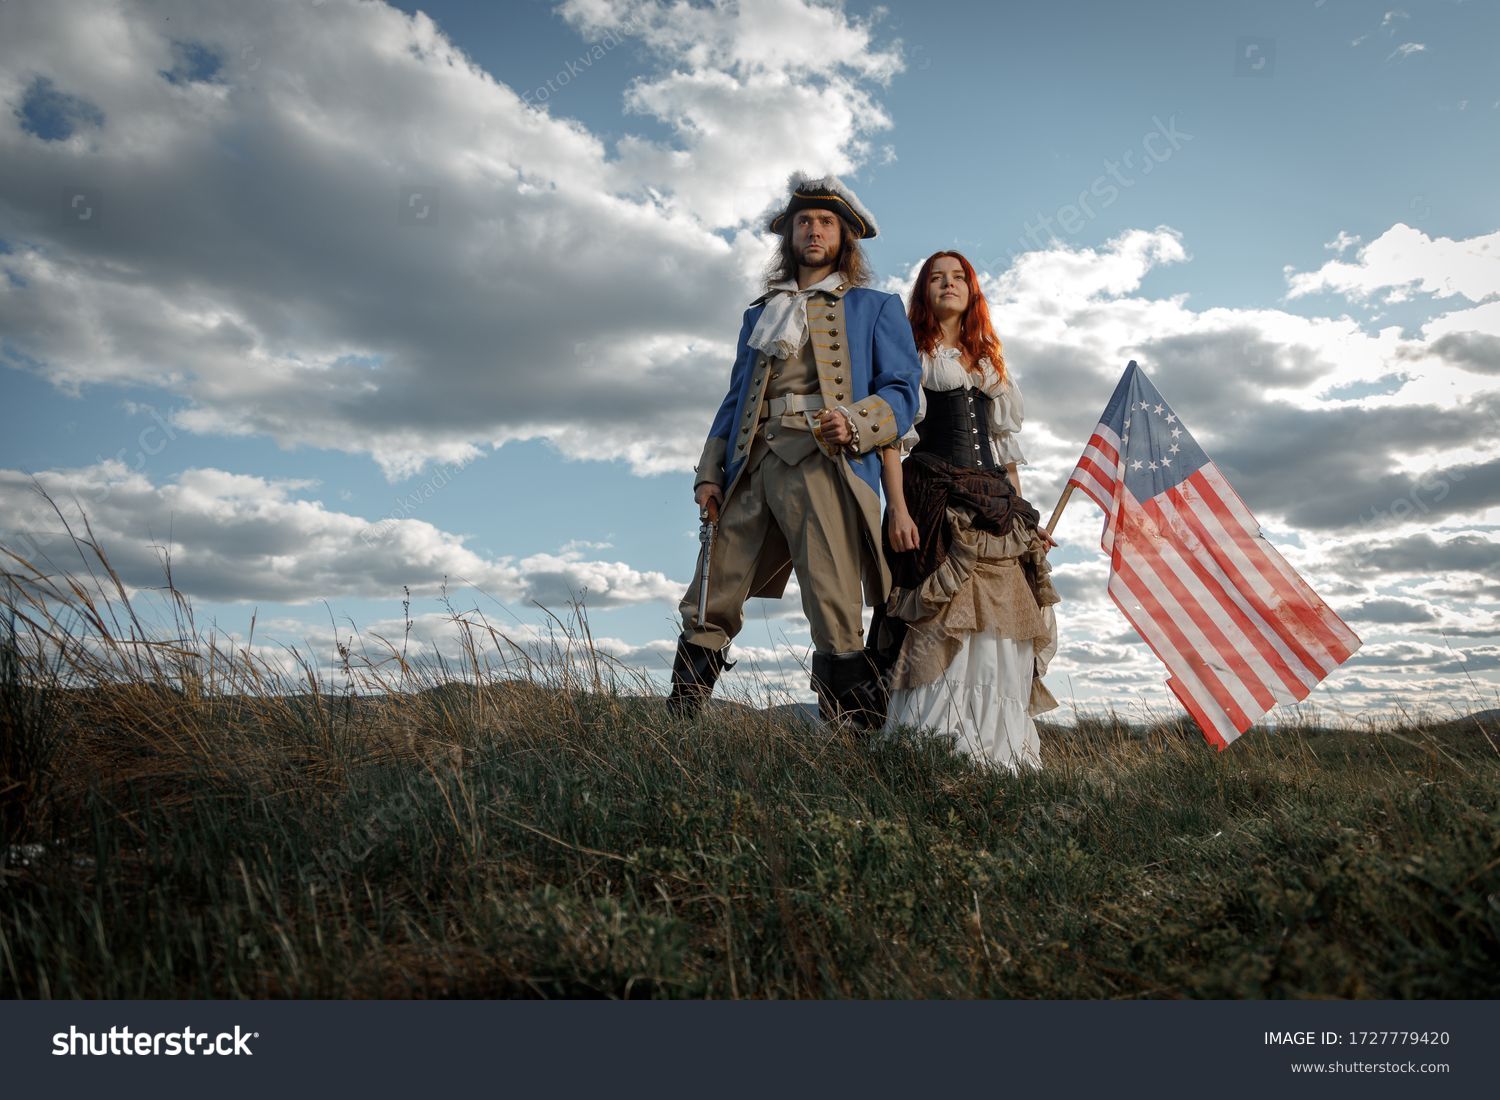 Man in form of officer of War of Independence and girl in historical dress of 18th century. July 4 is US Independence Day. Couple of patriots freedom fighters in outdoor on background cloudy sky #1727779420